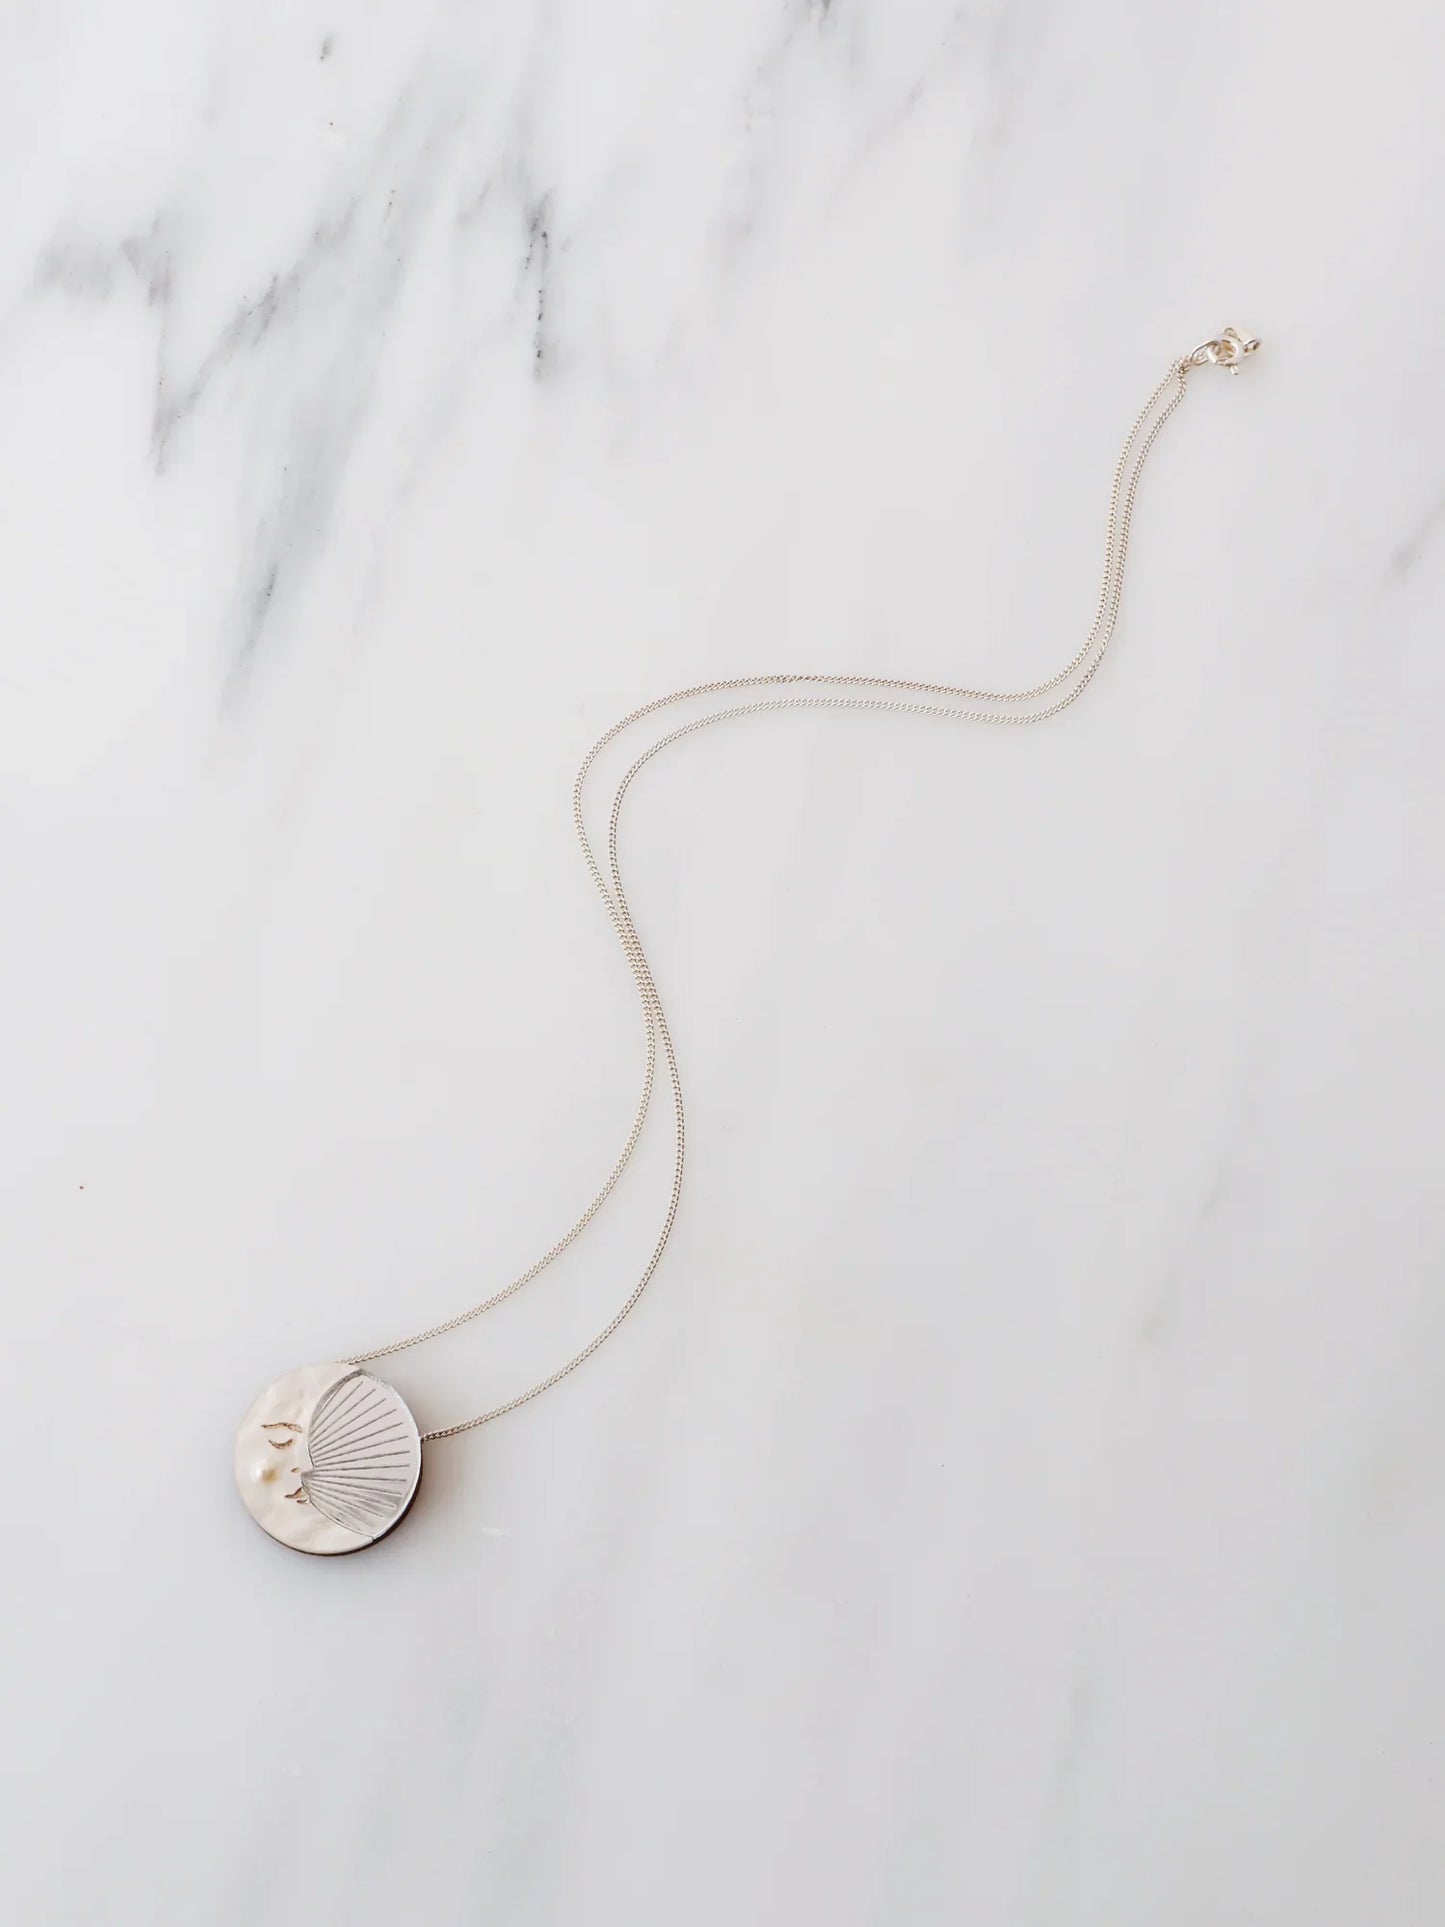 Silver Crescent Moon Necklace by wolf and moon in acrylic